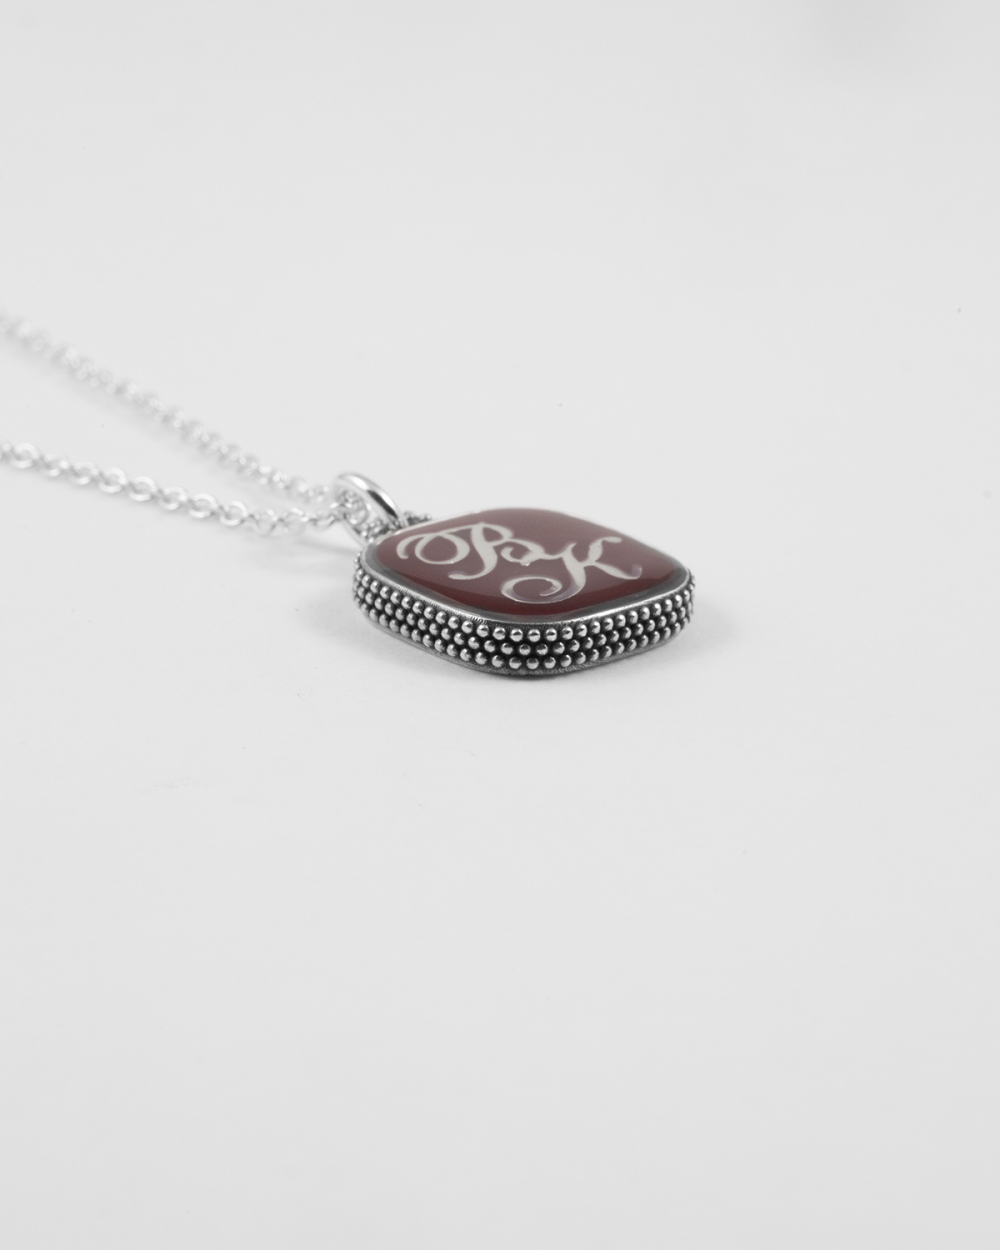 LETTER DOTTED SQUARE PENDANT